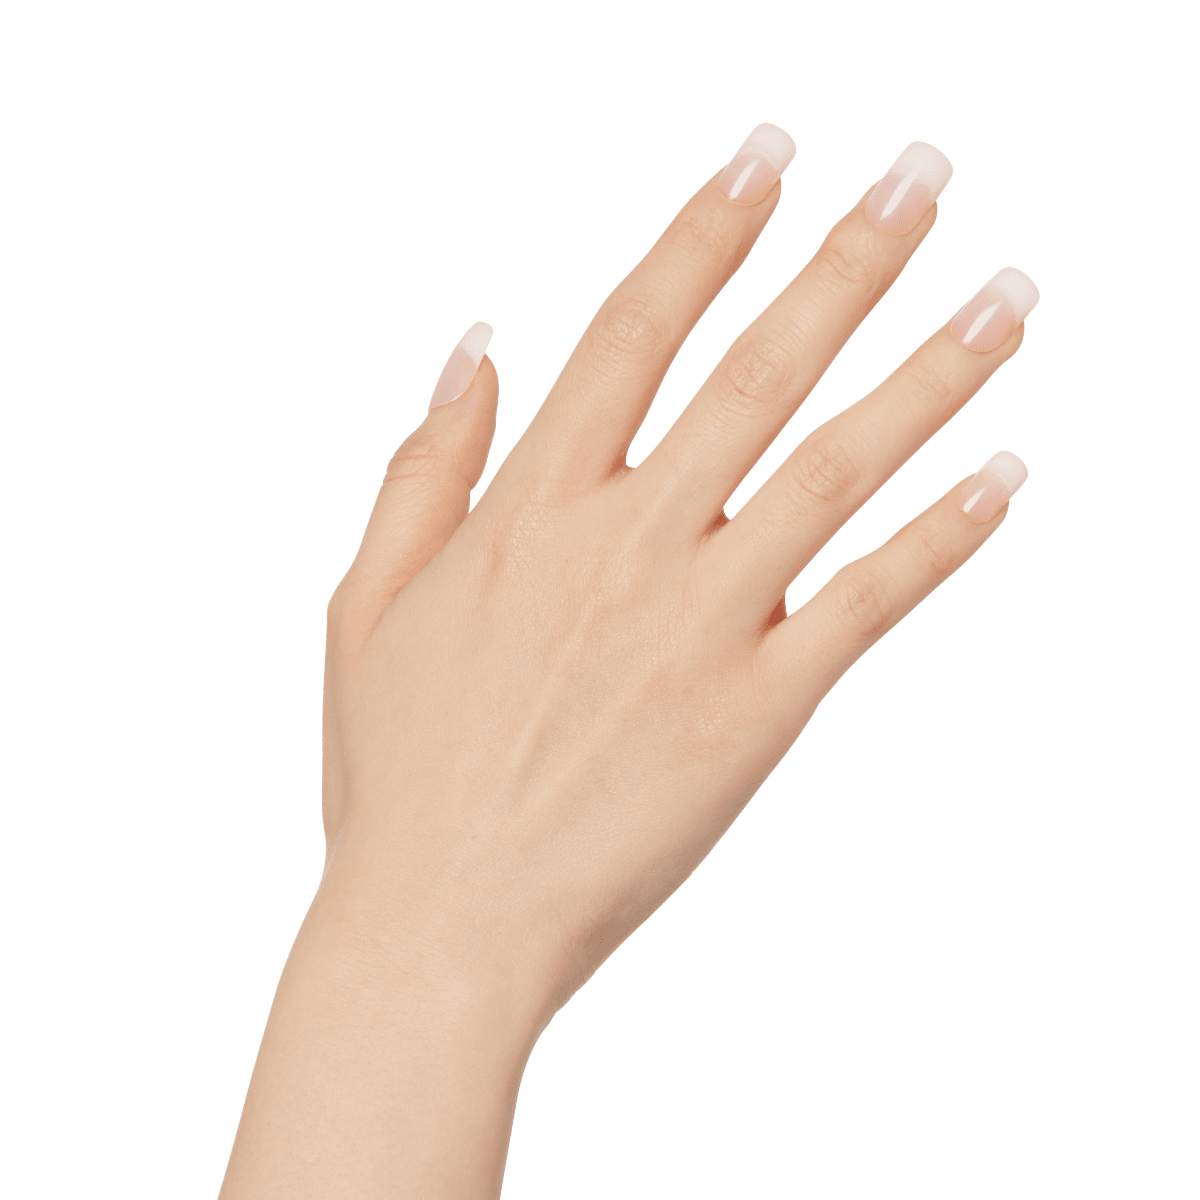 KISS Salon Acrylic Nude French Nails - Cashmere